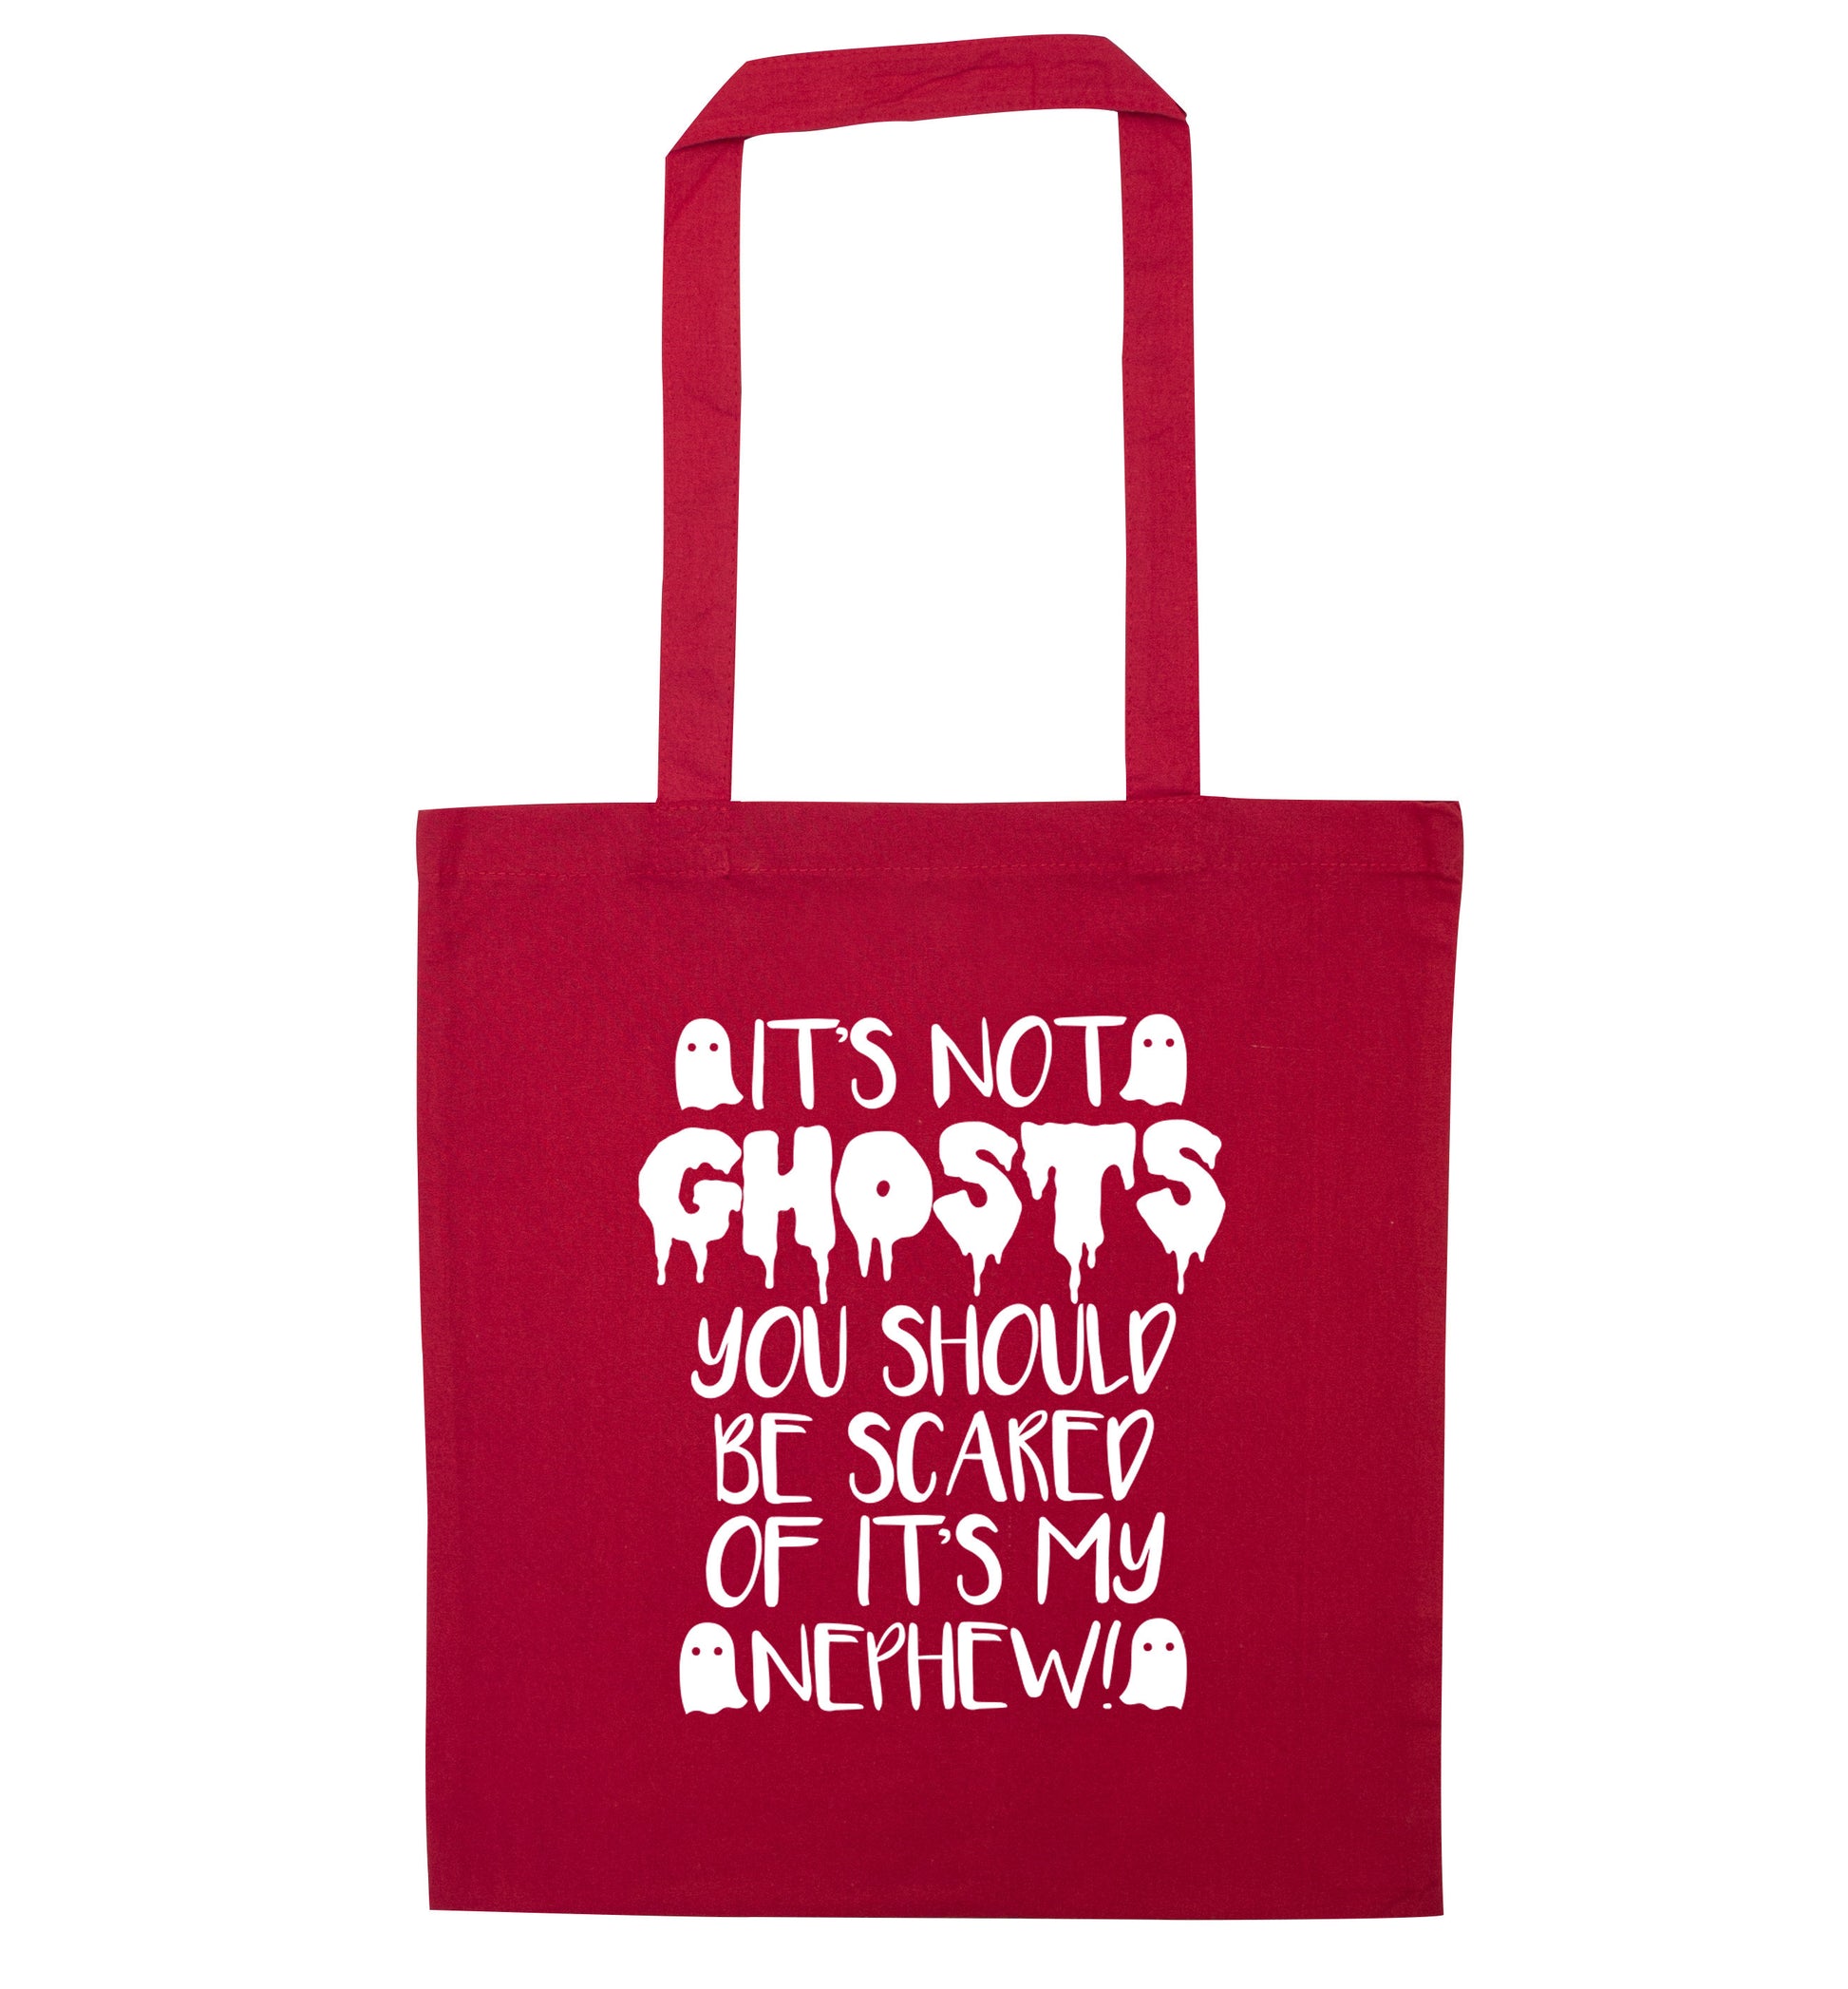 It's not ghosts you should be scared of it's my nephew! red tote bag